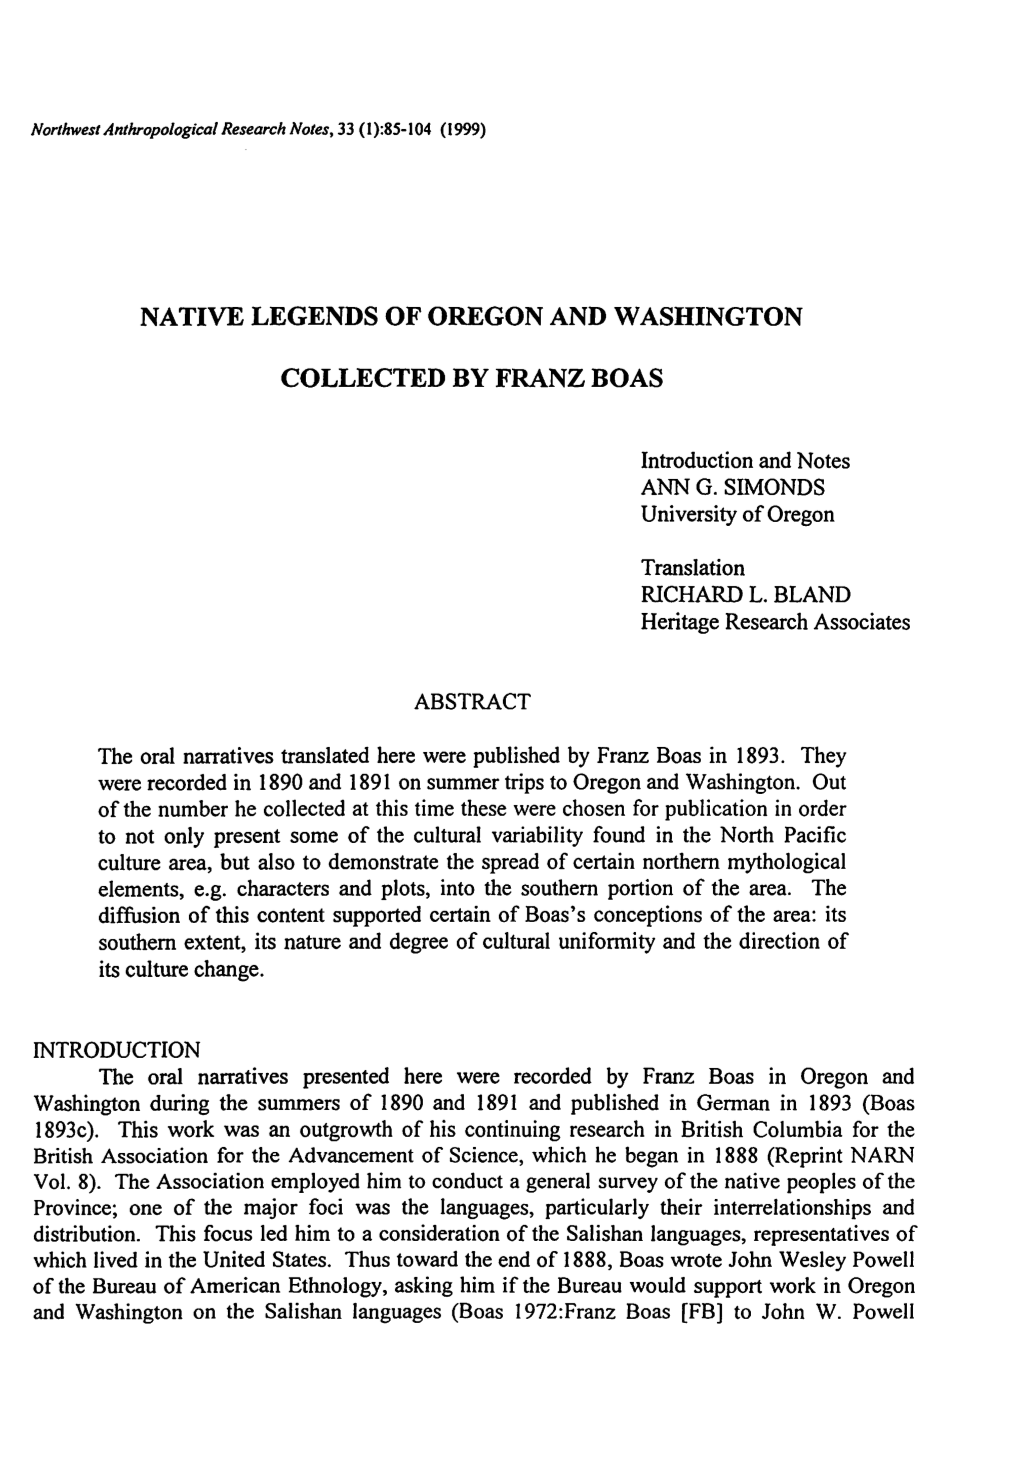 Native Legends of Oregon and Washington Collected By